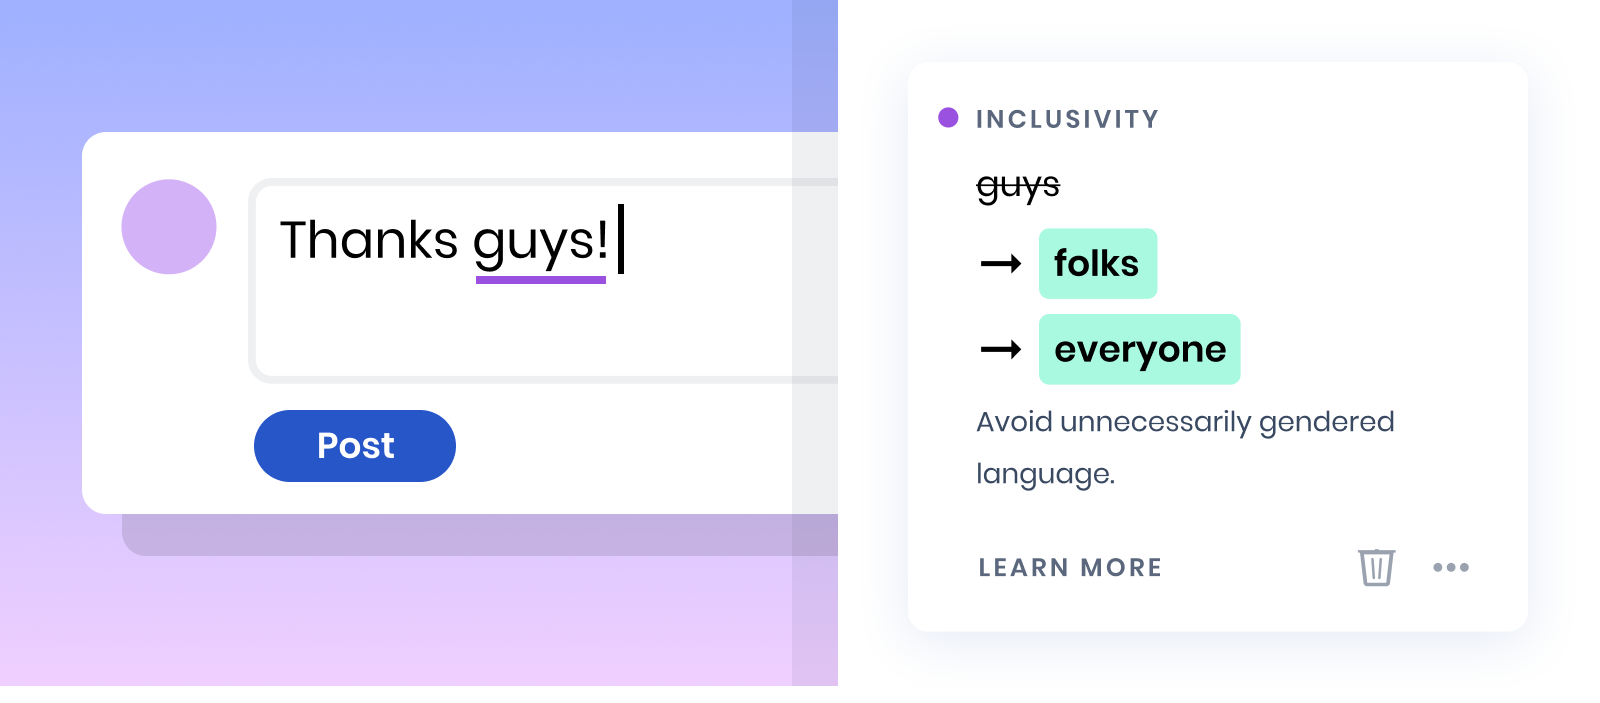 Image is a UI screenshot of an in-line correction to a message that reads "Thanks guys!". The AI tool suggests more inclusive language to use instead, like "folks" or "everyone."